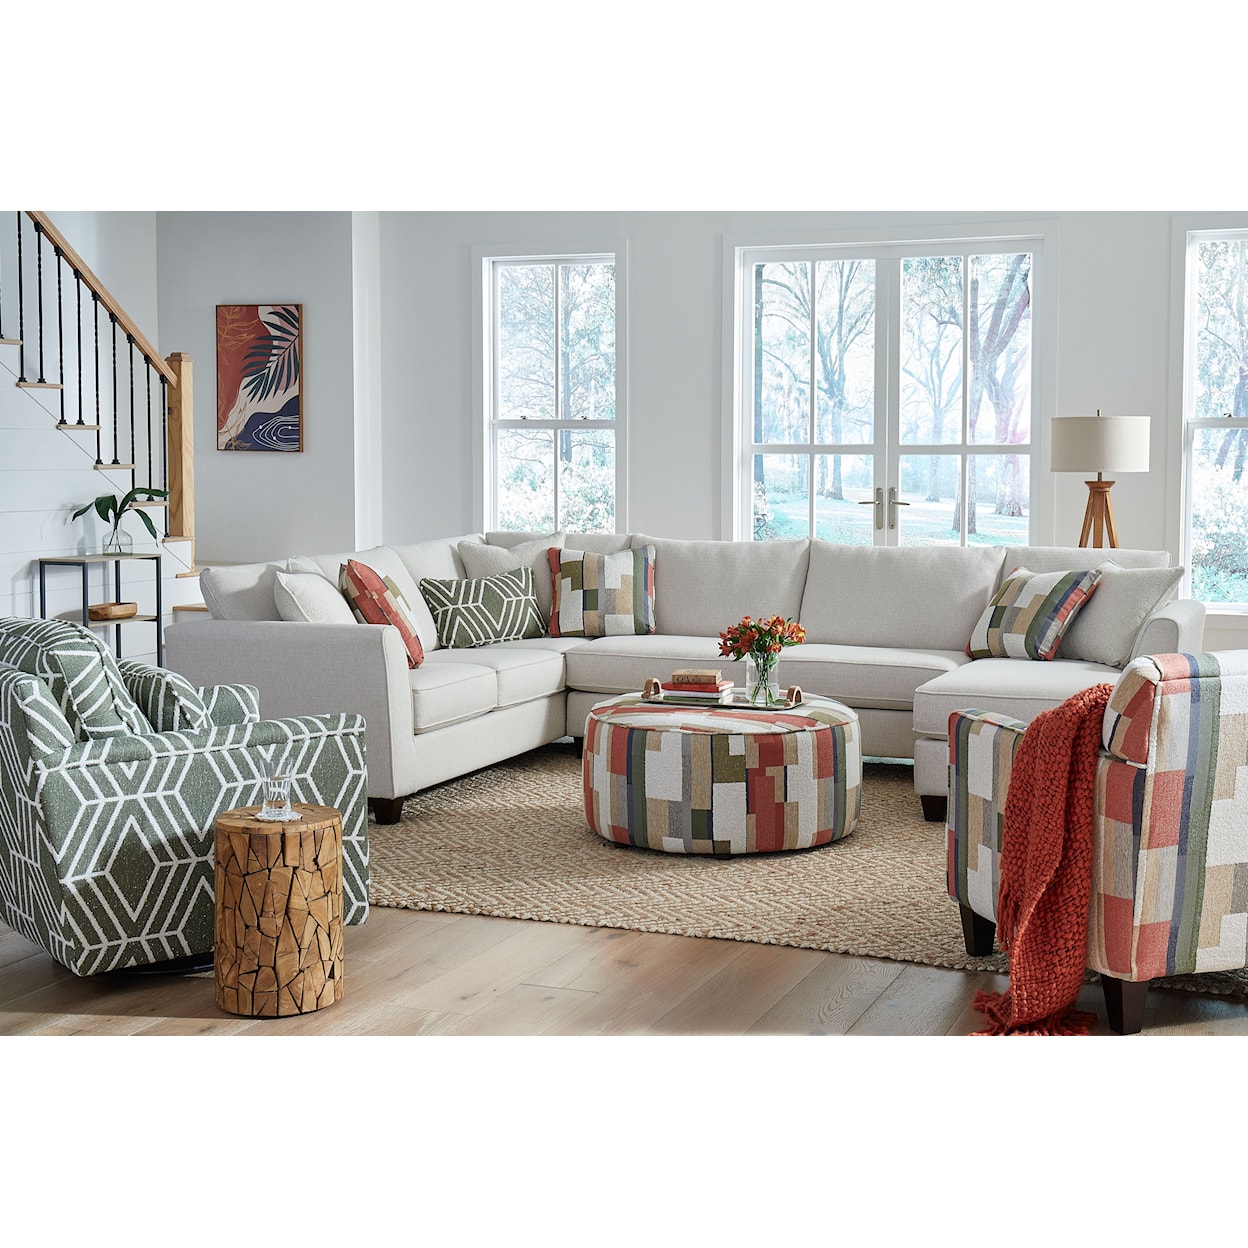 VFM Signature 28 SUGARSHACK GLACIER Sectional with Chaise